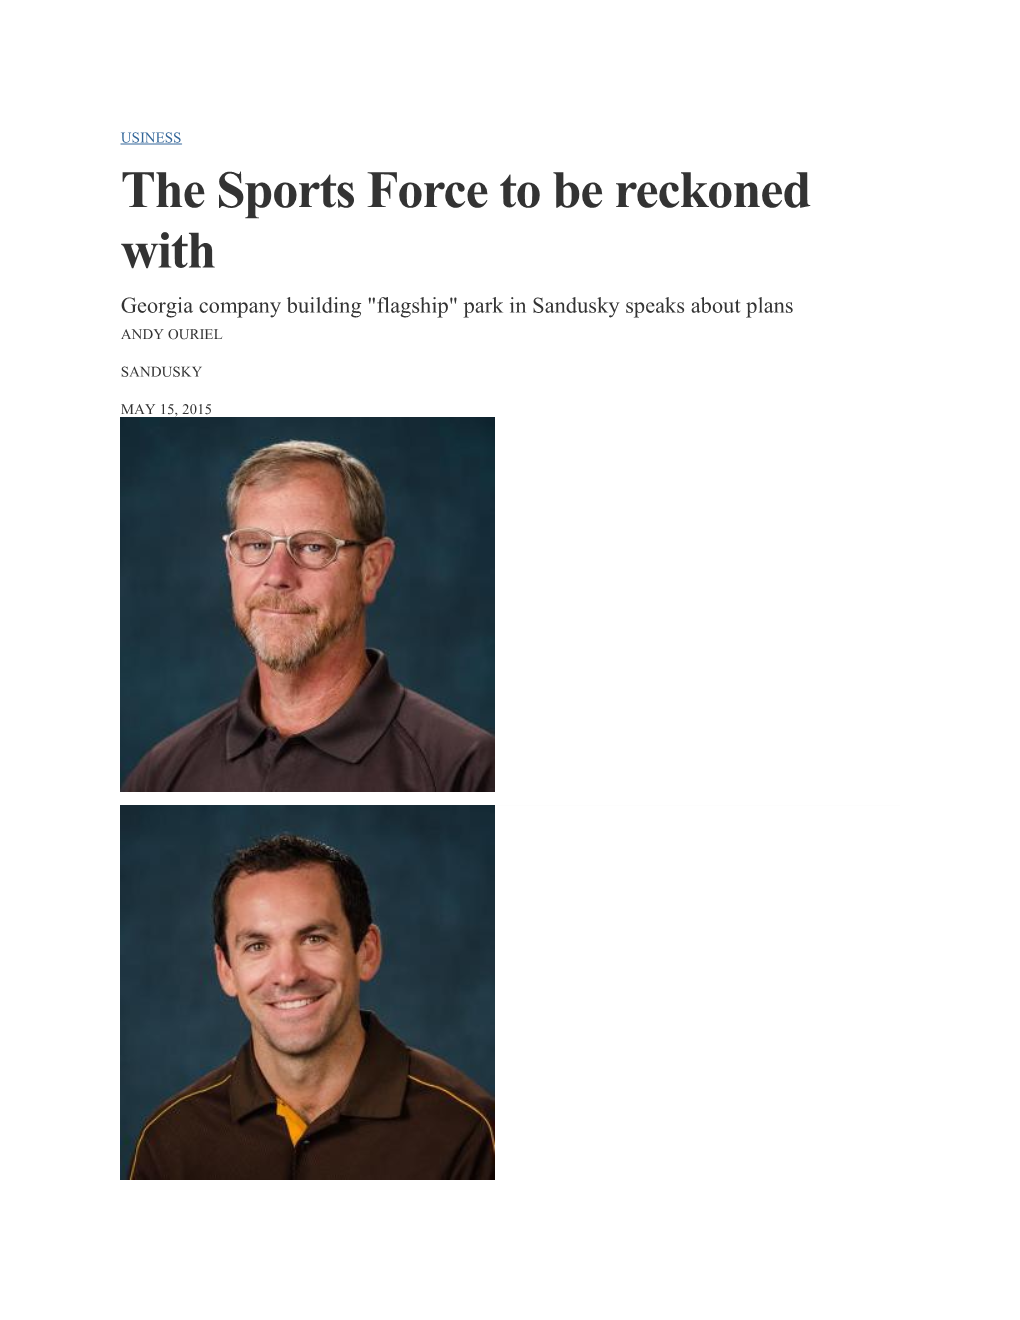 The Sports Force to Be Reckoned With